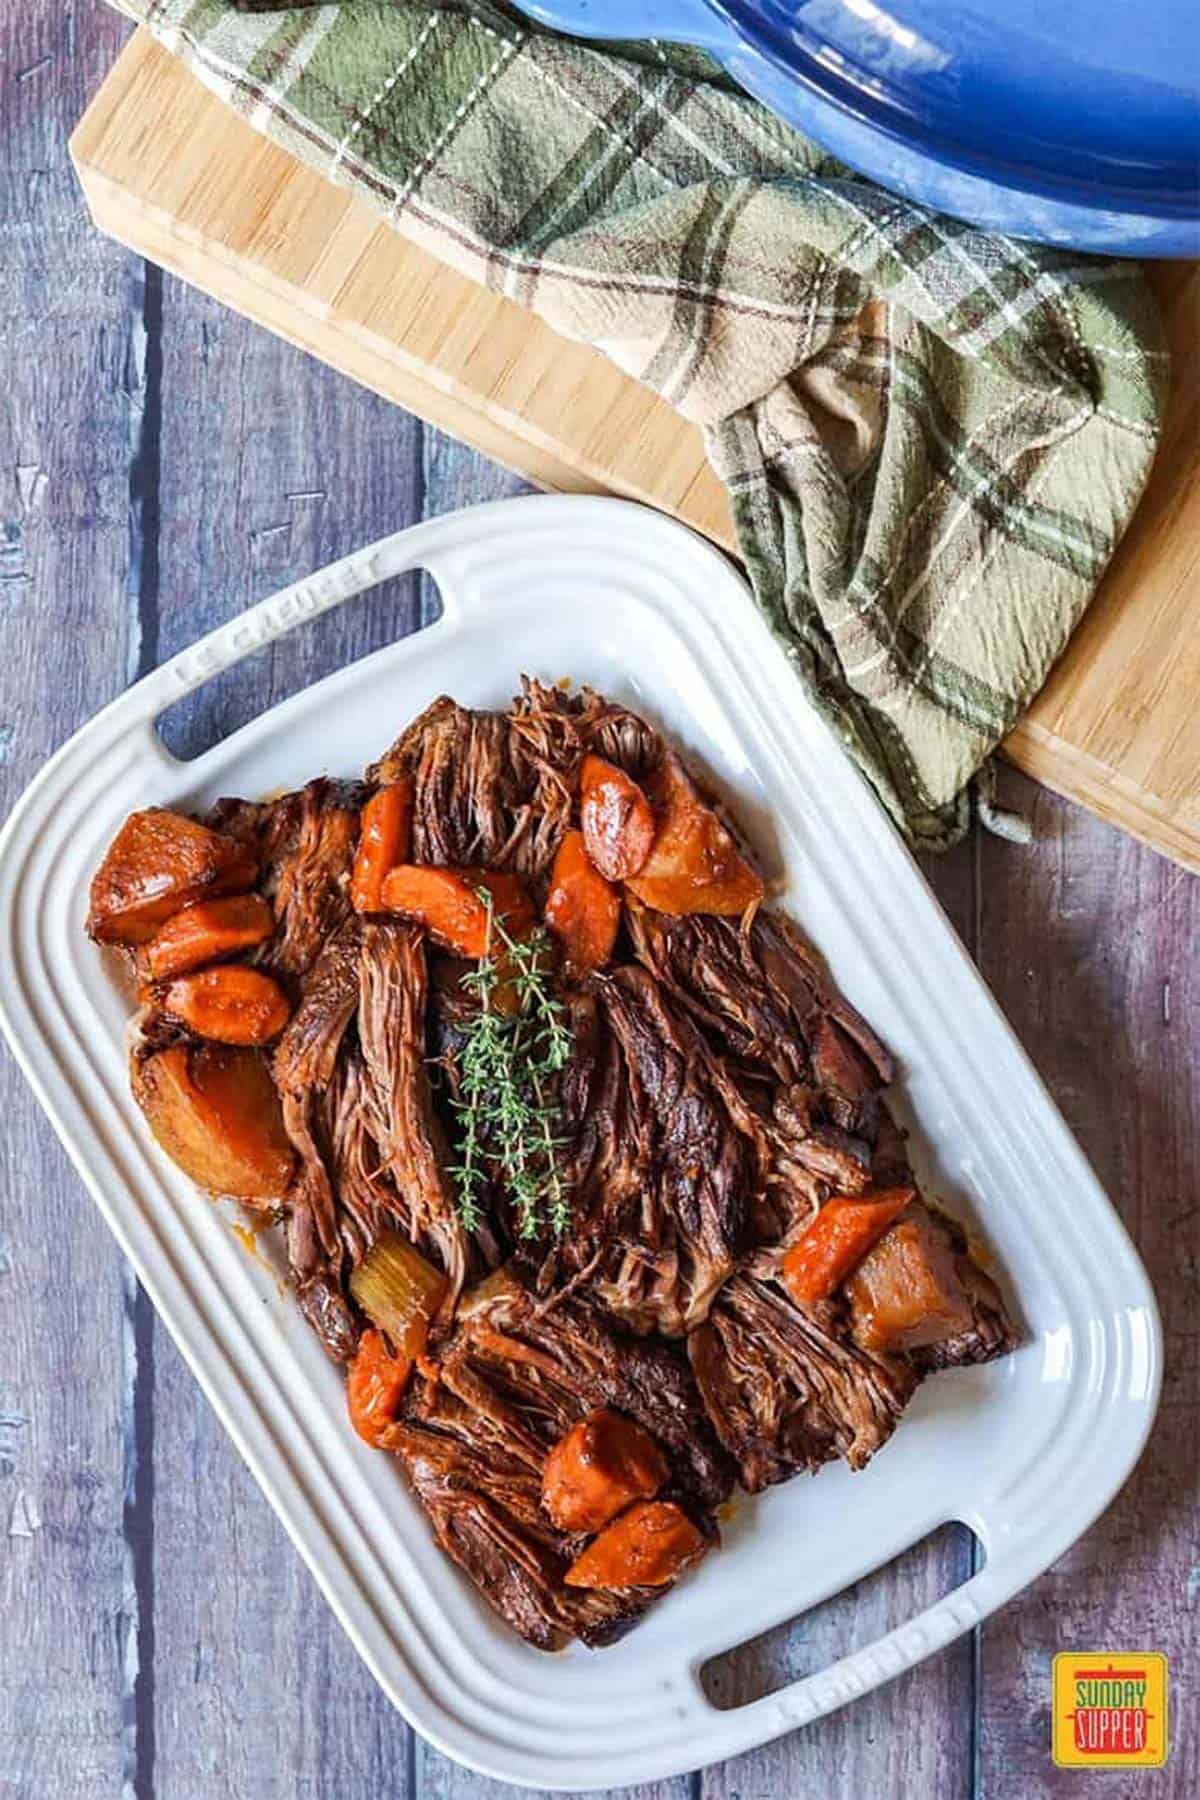 Shredded beef chuck roast with vegetables on a white platter next to the dutch oven lid